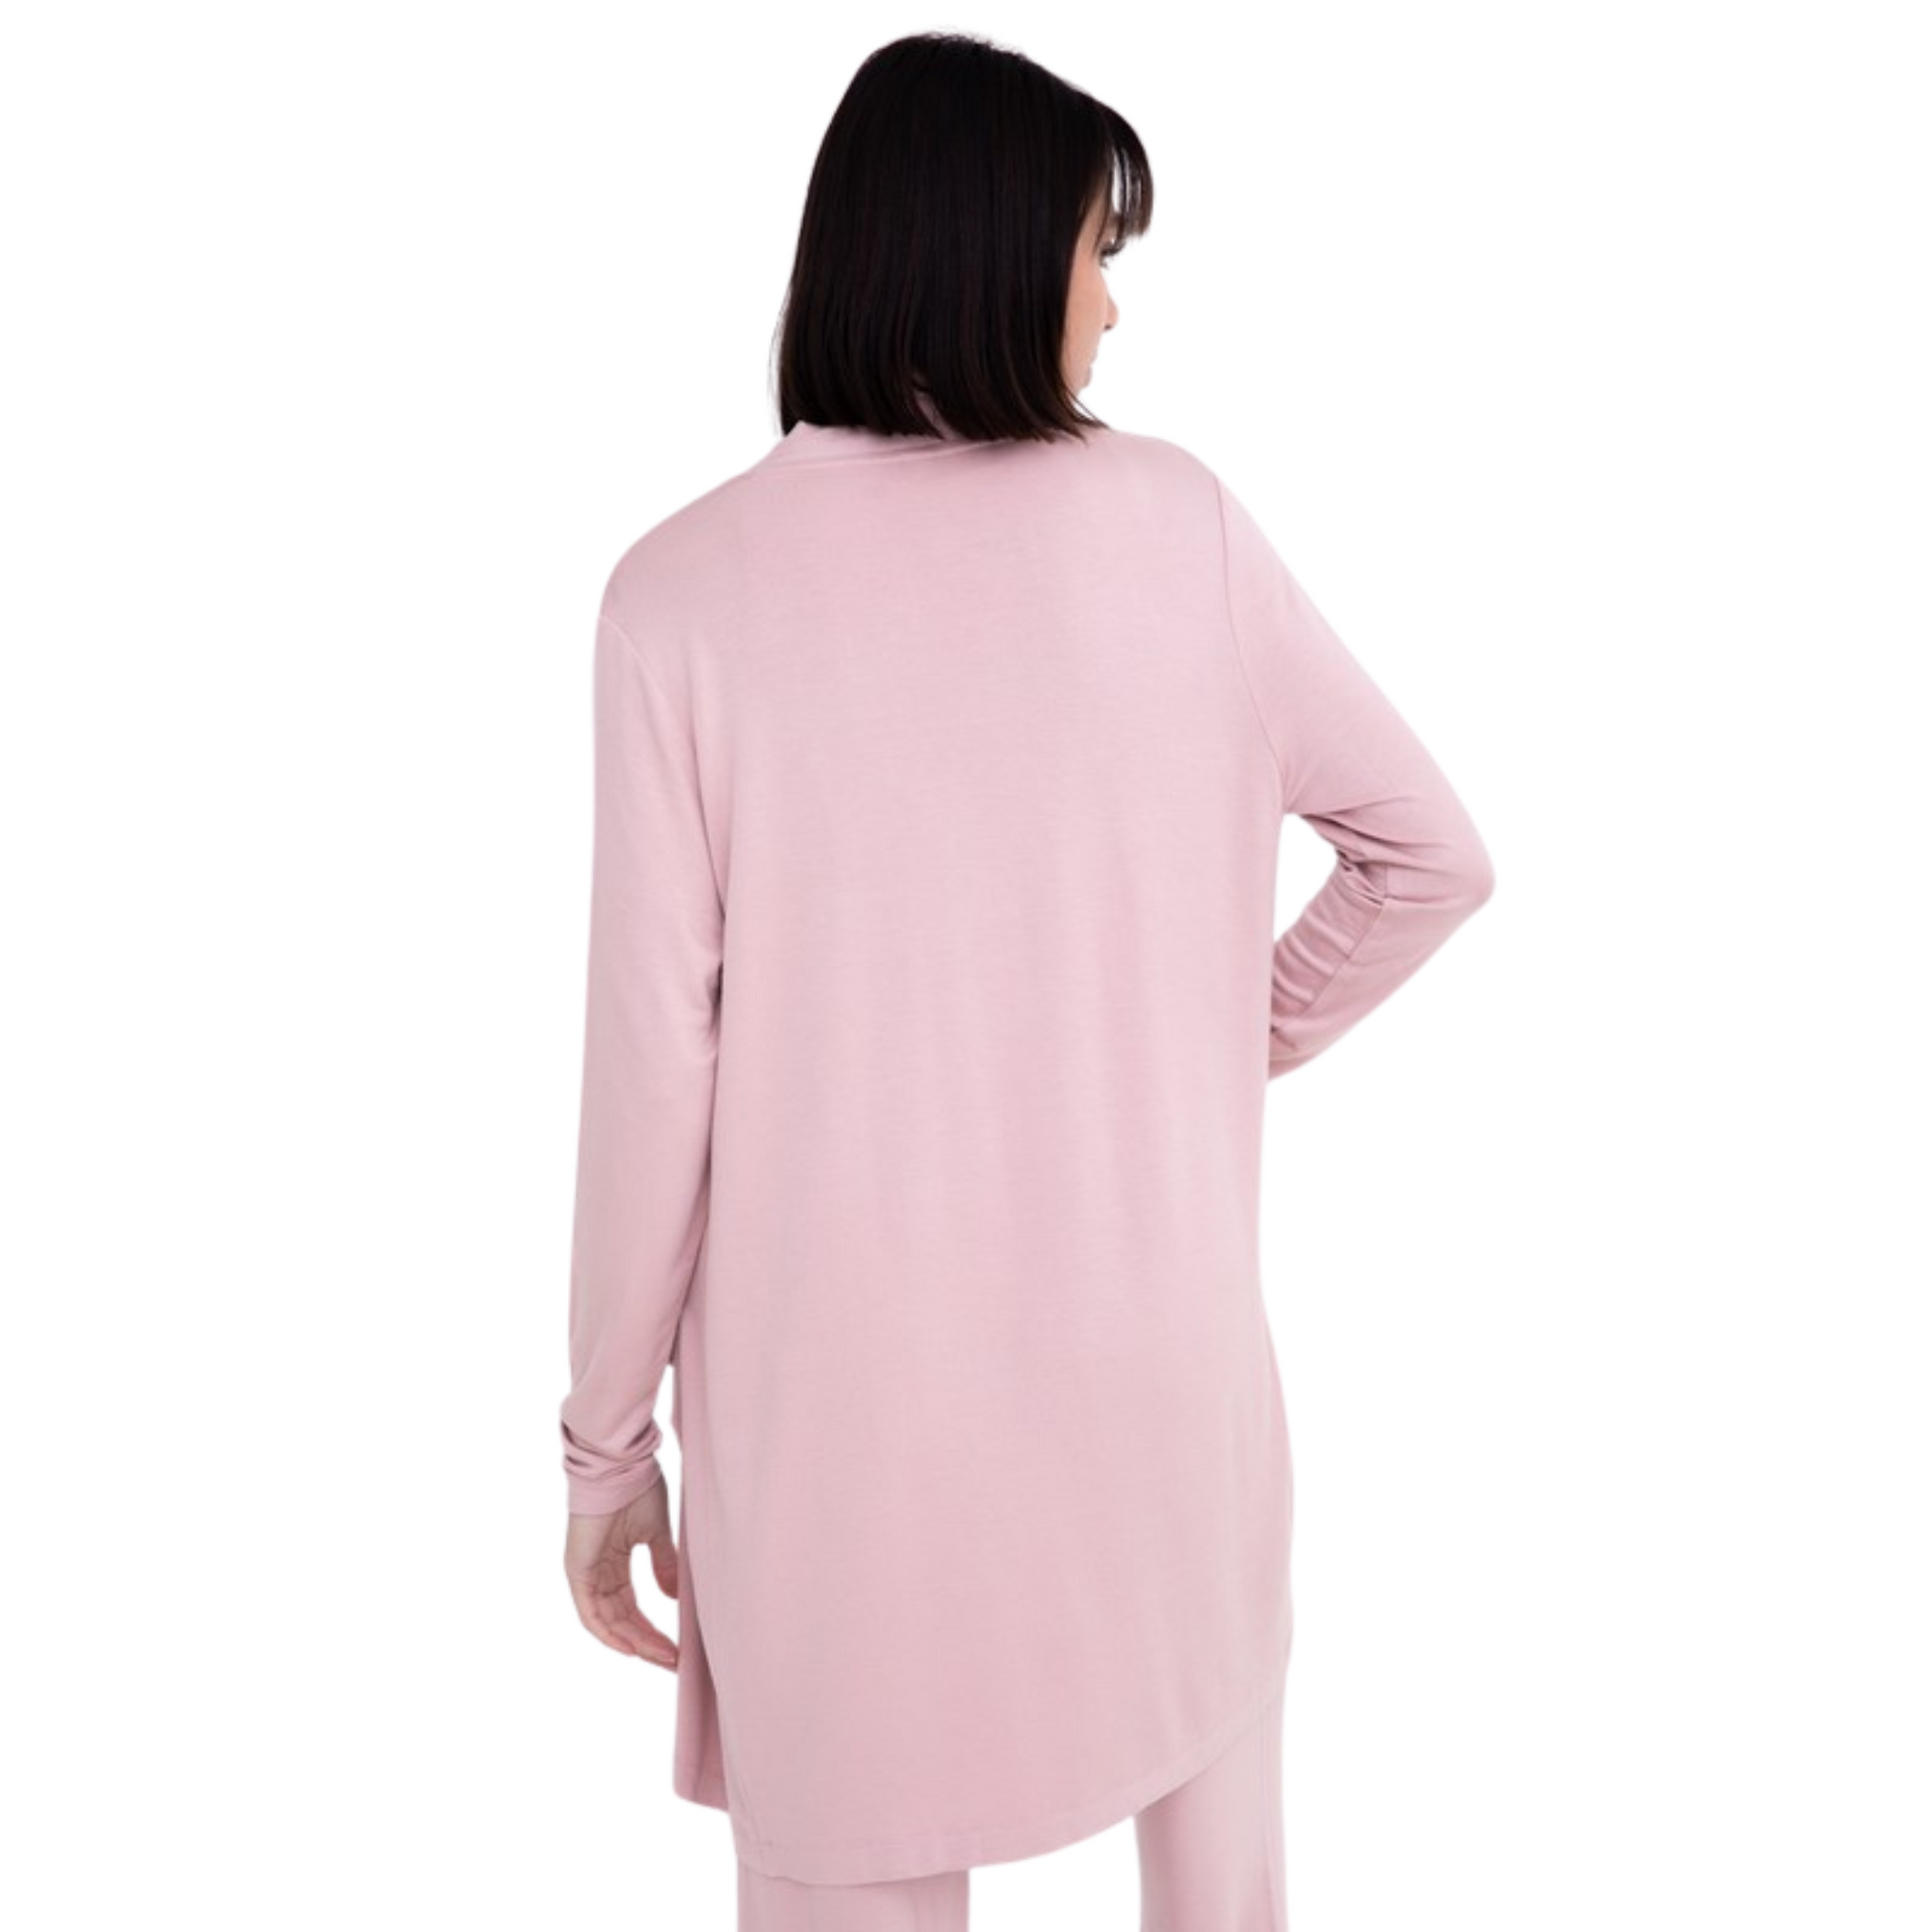 Upgrade your wardrobe with this stylish Open-Front Terry Cardigan. Featuring lightweight fabric and long sleeves, this cardigan is perfect for any occasion. The easy-to-style pink color will keep you looking chic and modern.